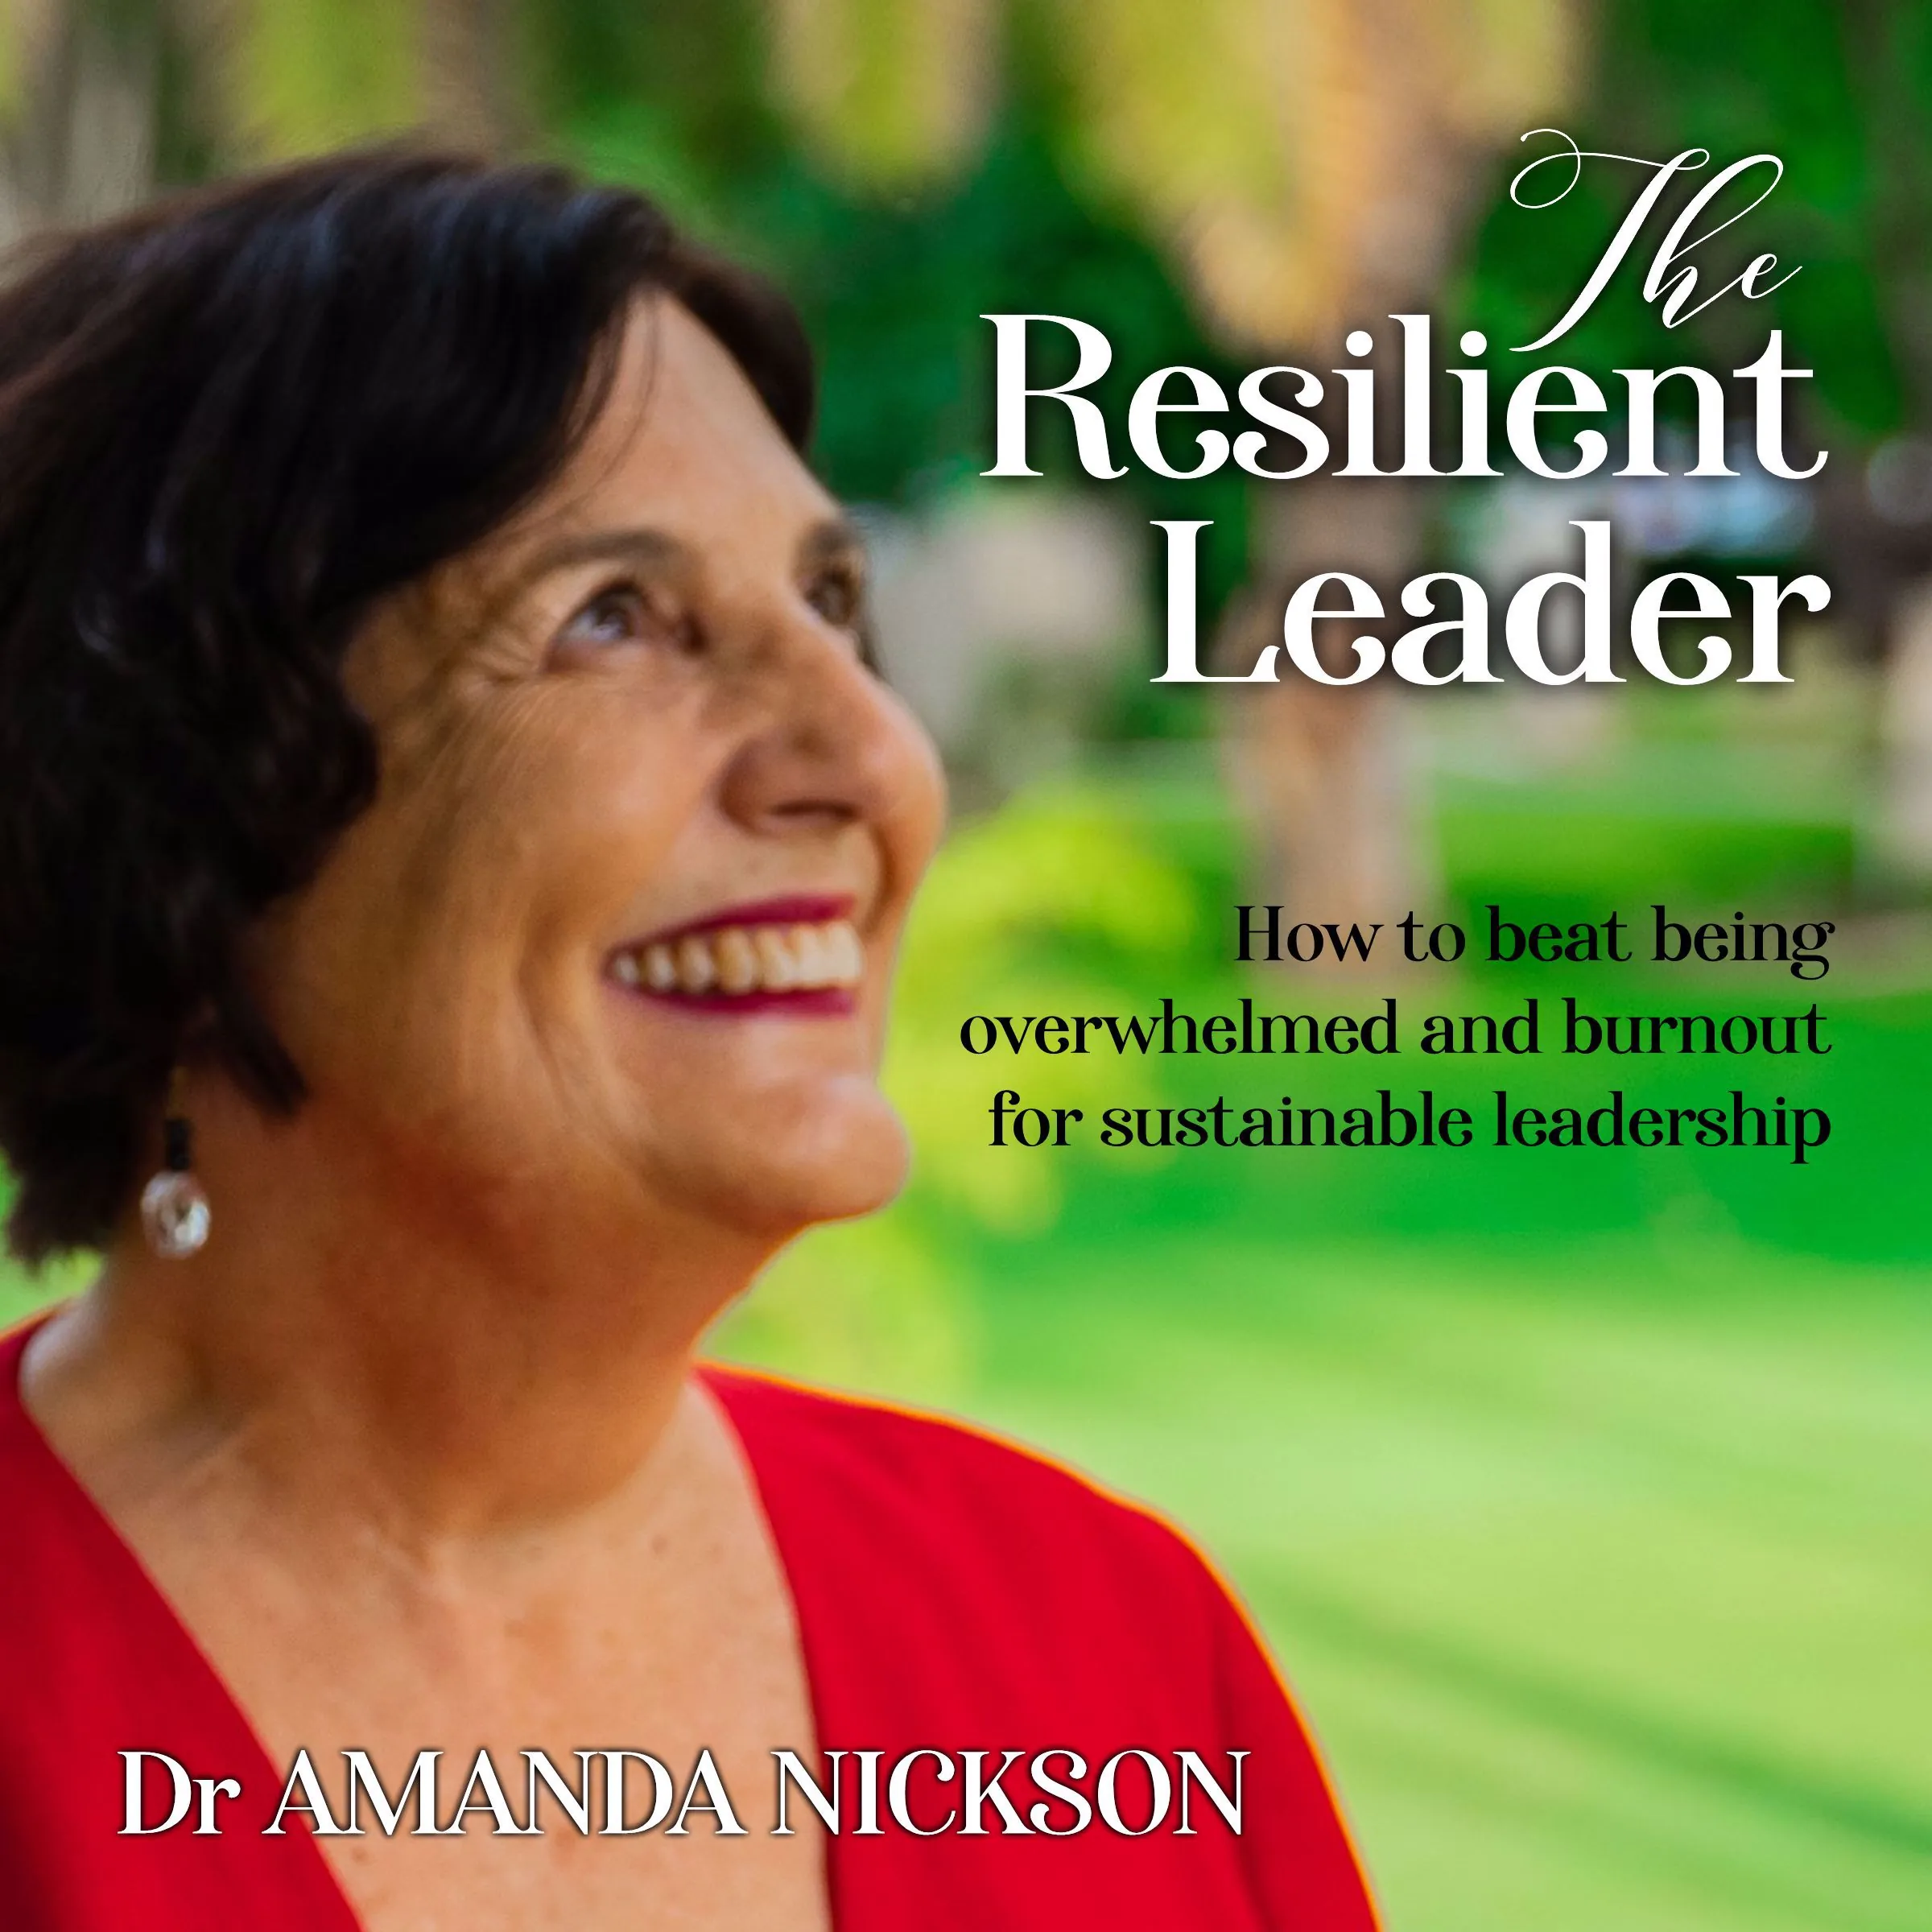 The Resilient Leader by Dr. Amanda Nickson Audiobook